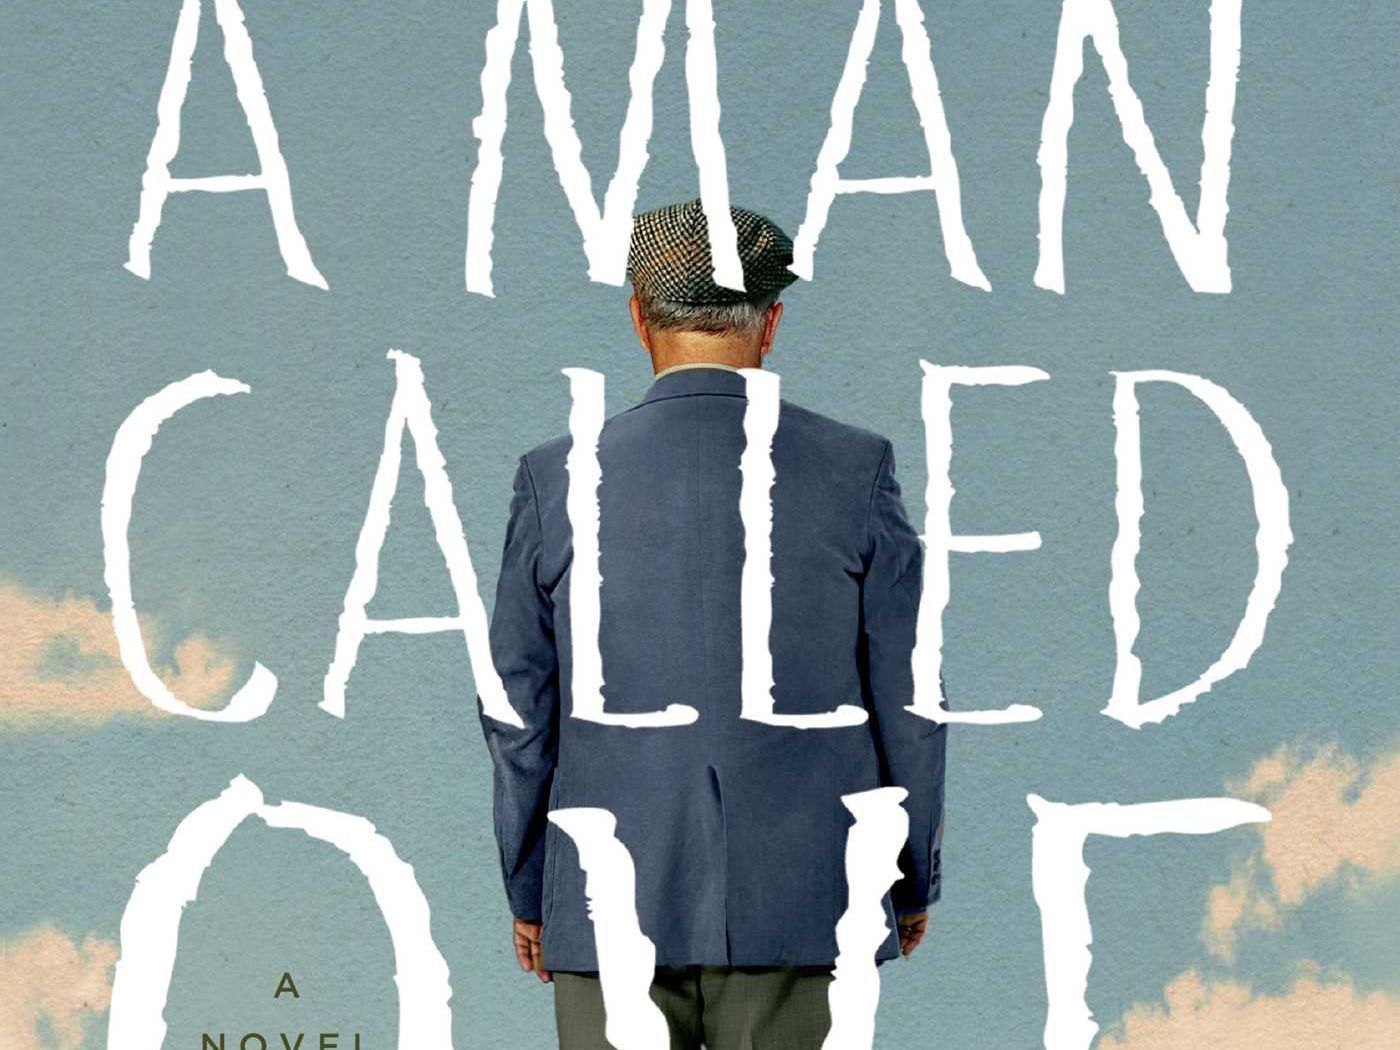 5 Reasons You Should Read "A Man Called Ove" .